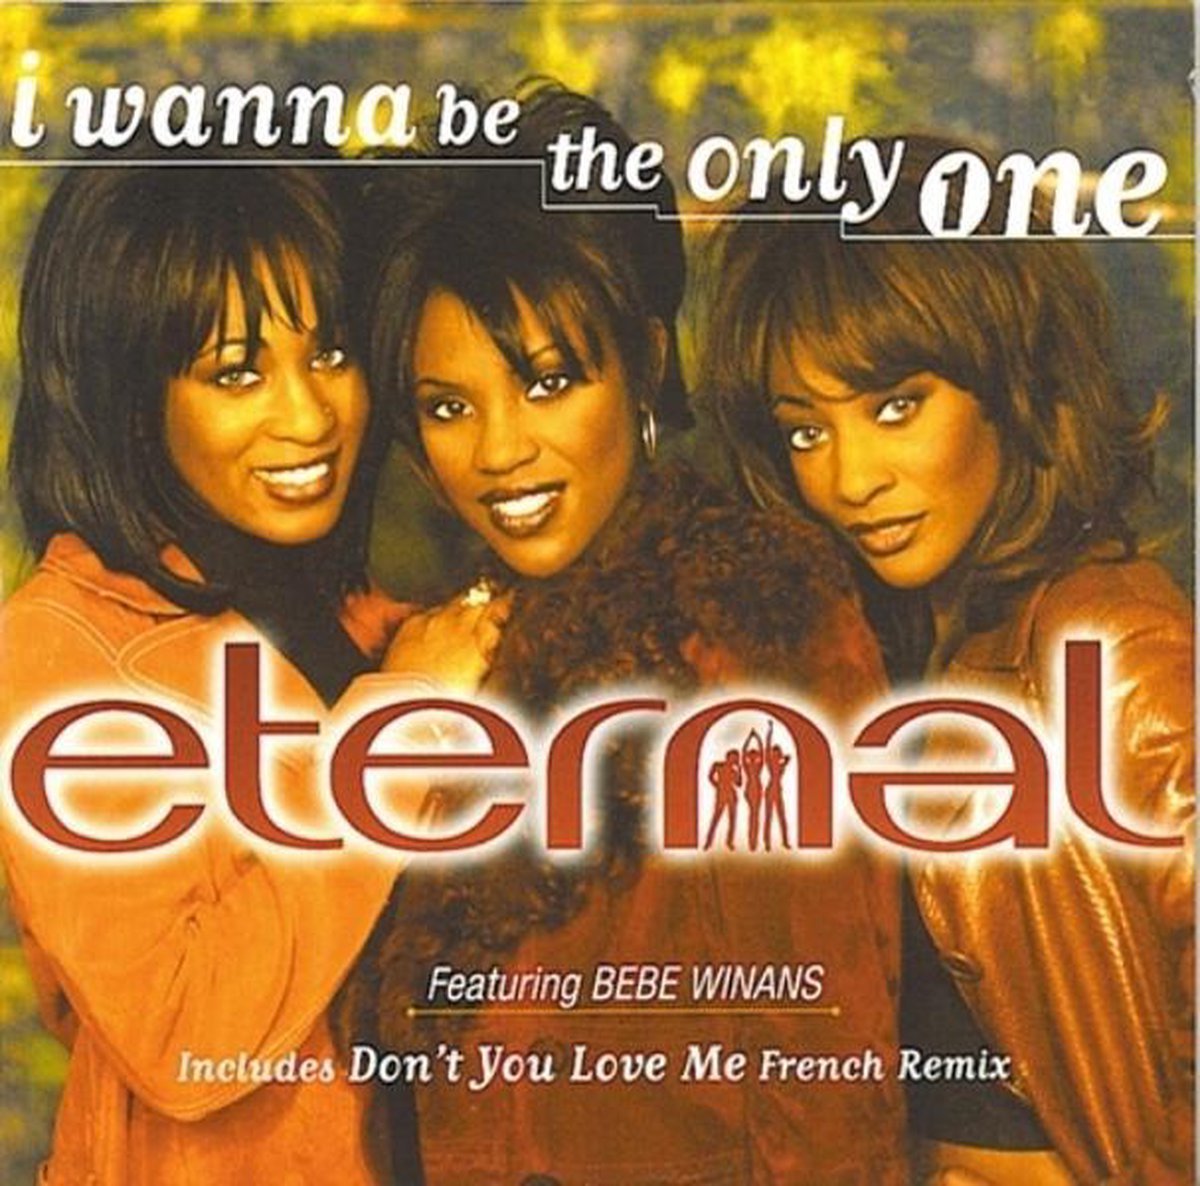 I Wanna Be The Only One - ETERNAL FEATURING BEBE WINANS